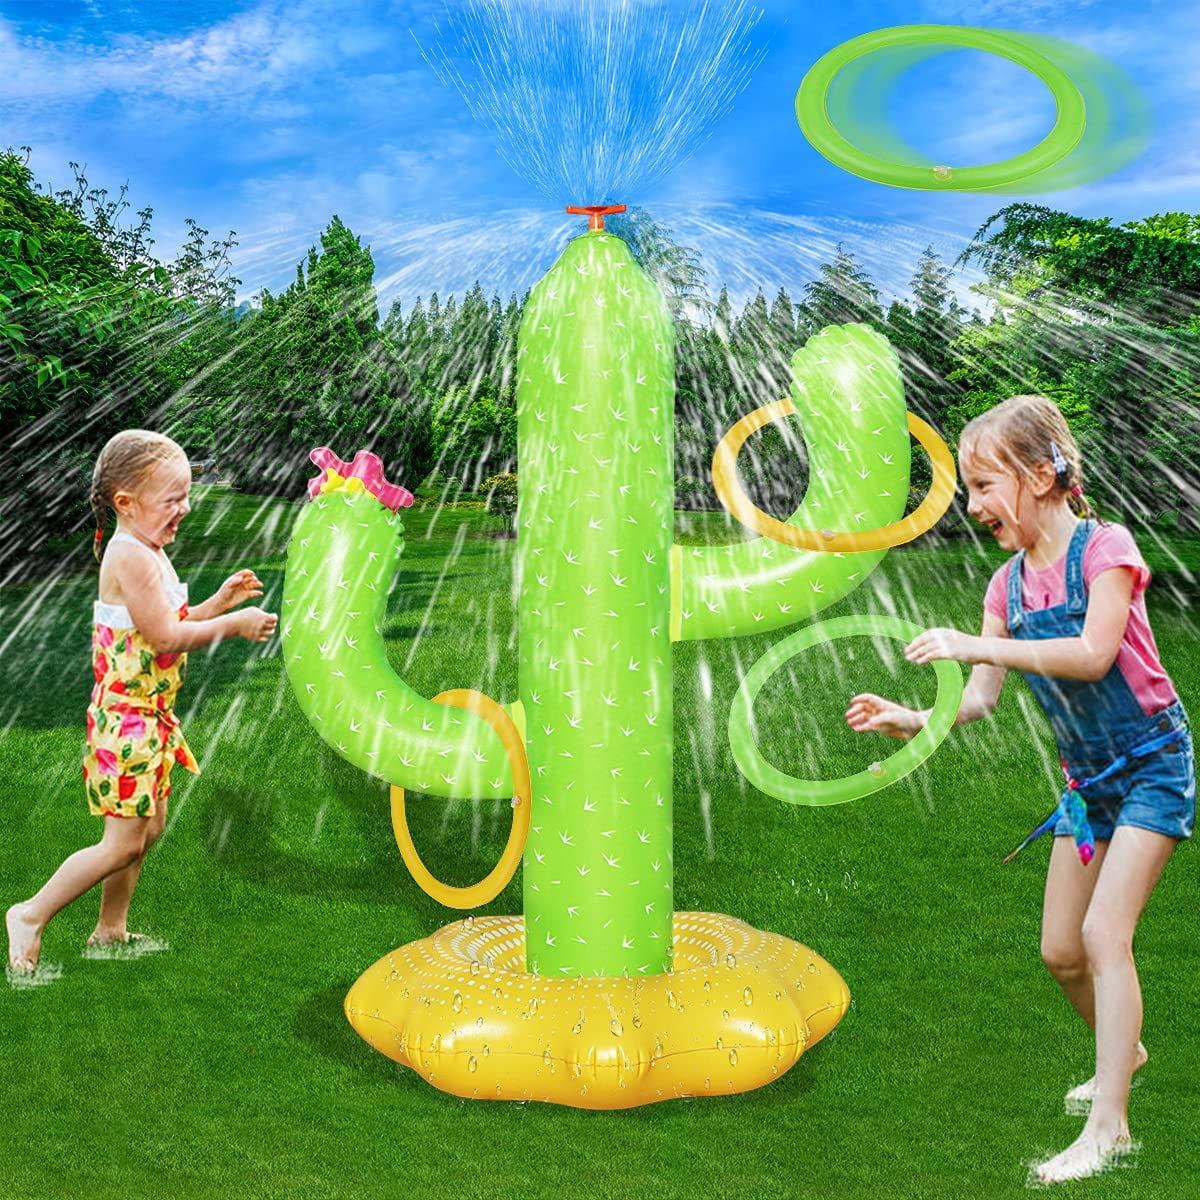 Outdoor for Rings, for Sprinkler Gifts 4 Children with 4 and Cactus Water Game Backyard Summer 5 3 Toys 6 Kids, Water Ages for Toy Inflatable U Spray Fun Sprinkler Cactus Girls, Boys Years